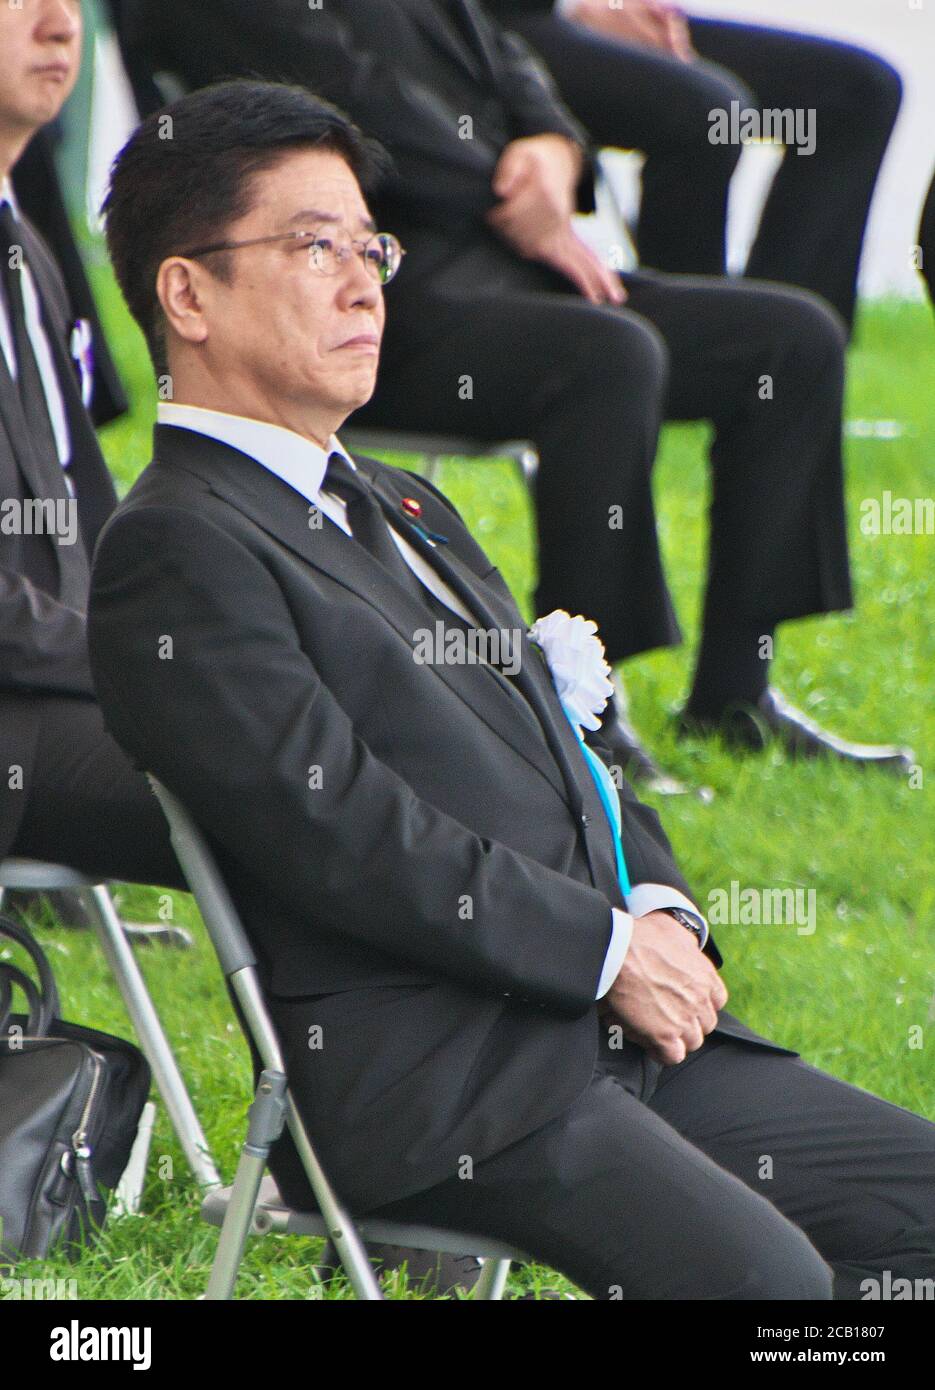 Ministry of Health, Labour and Welfare, Nobukatsu Kato attends the ceremony of the 75th anniversary memorial service for atomic bomb victims at Hiroshima Peace Memorial Park in Hiroshima, Japan on August 6, 2020. (Photo by AFLO) Stock Photo